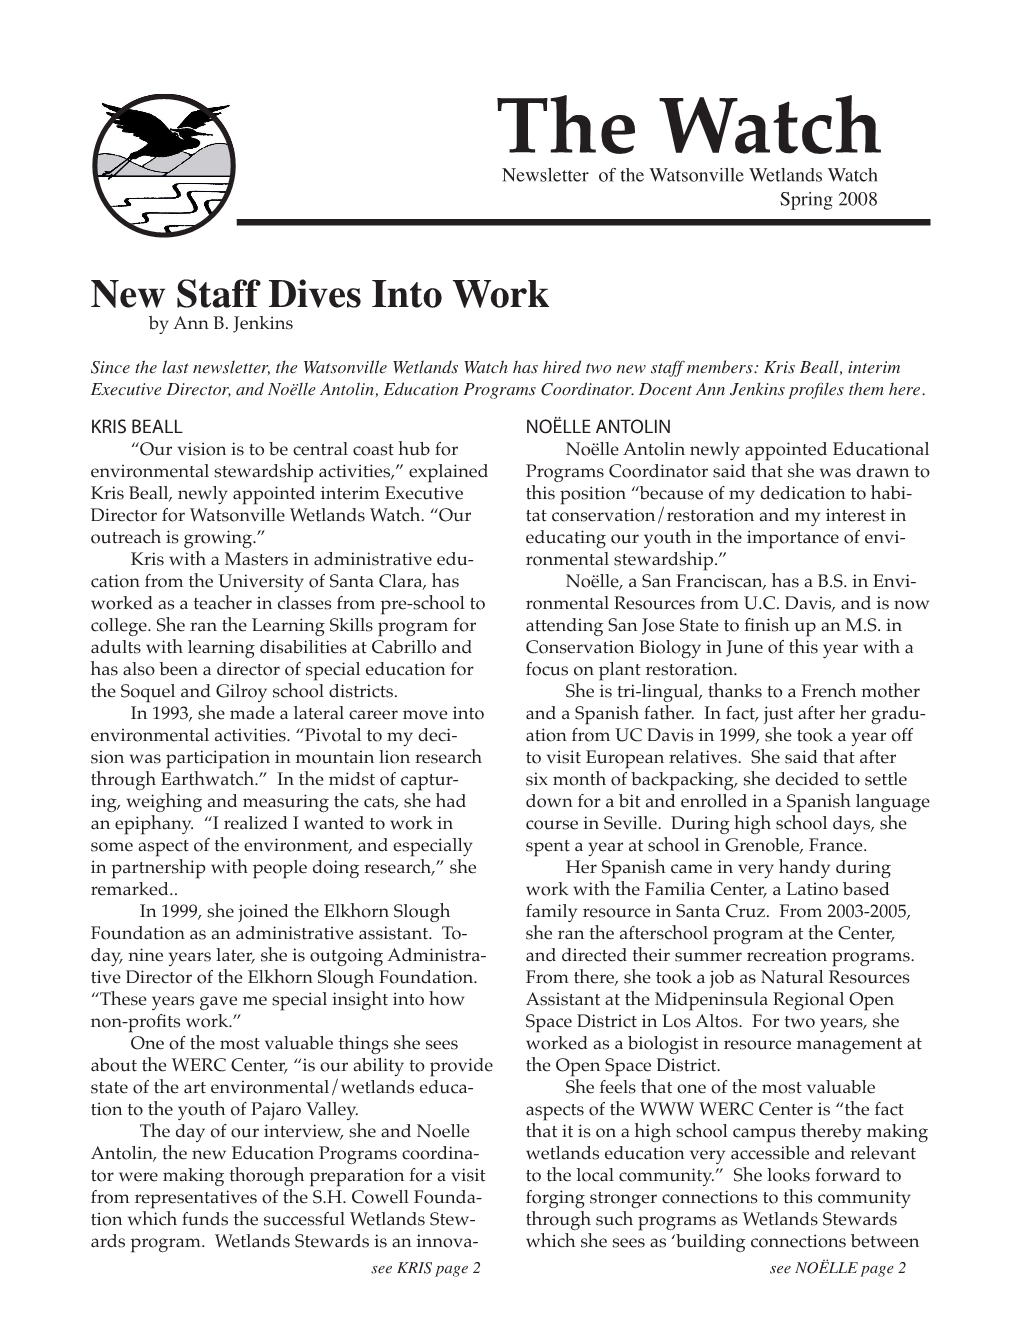 The Watch Newsletter of the Watsonville Wetlands Watch Spring 2008